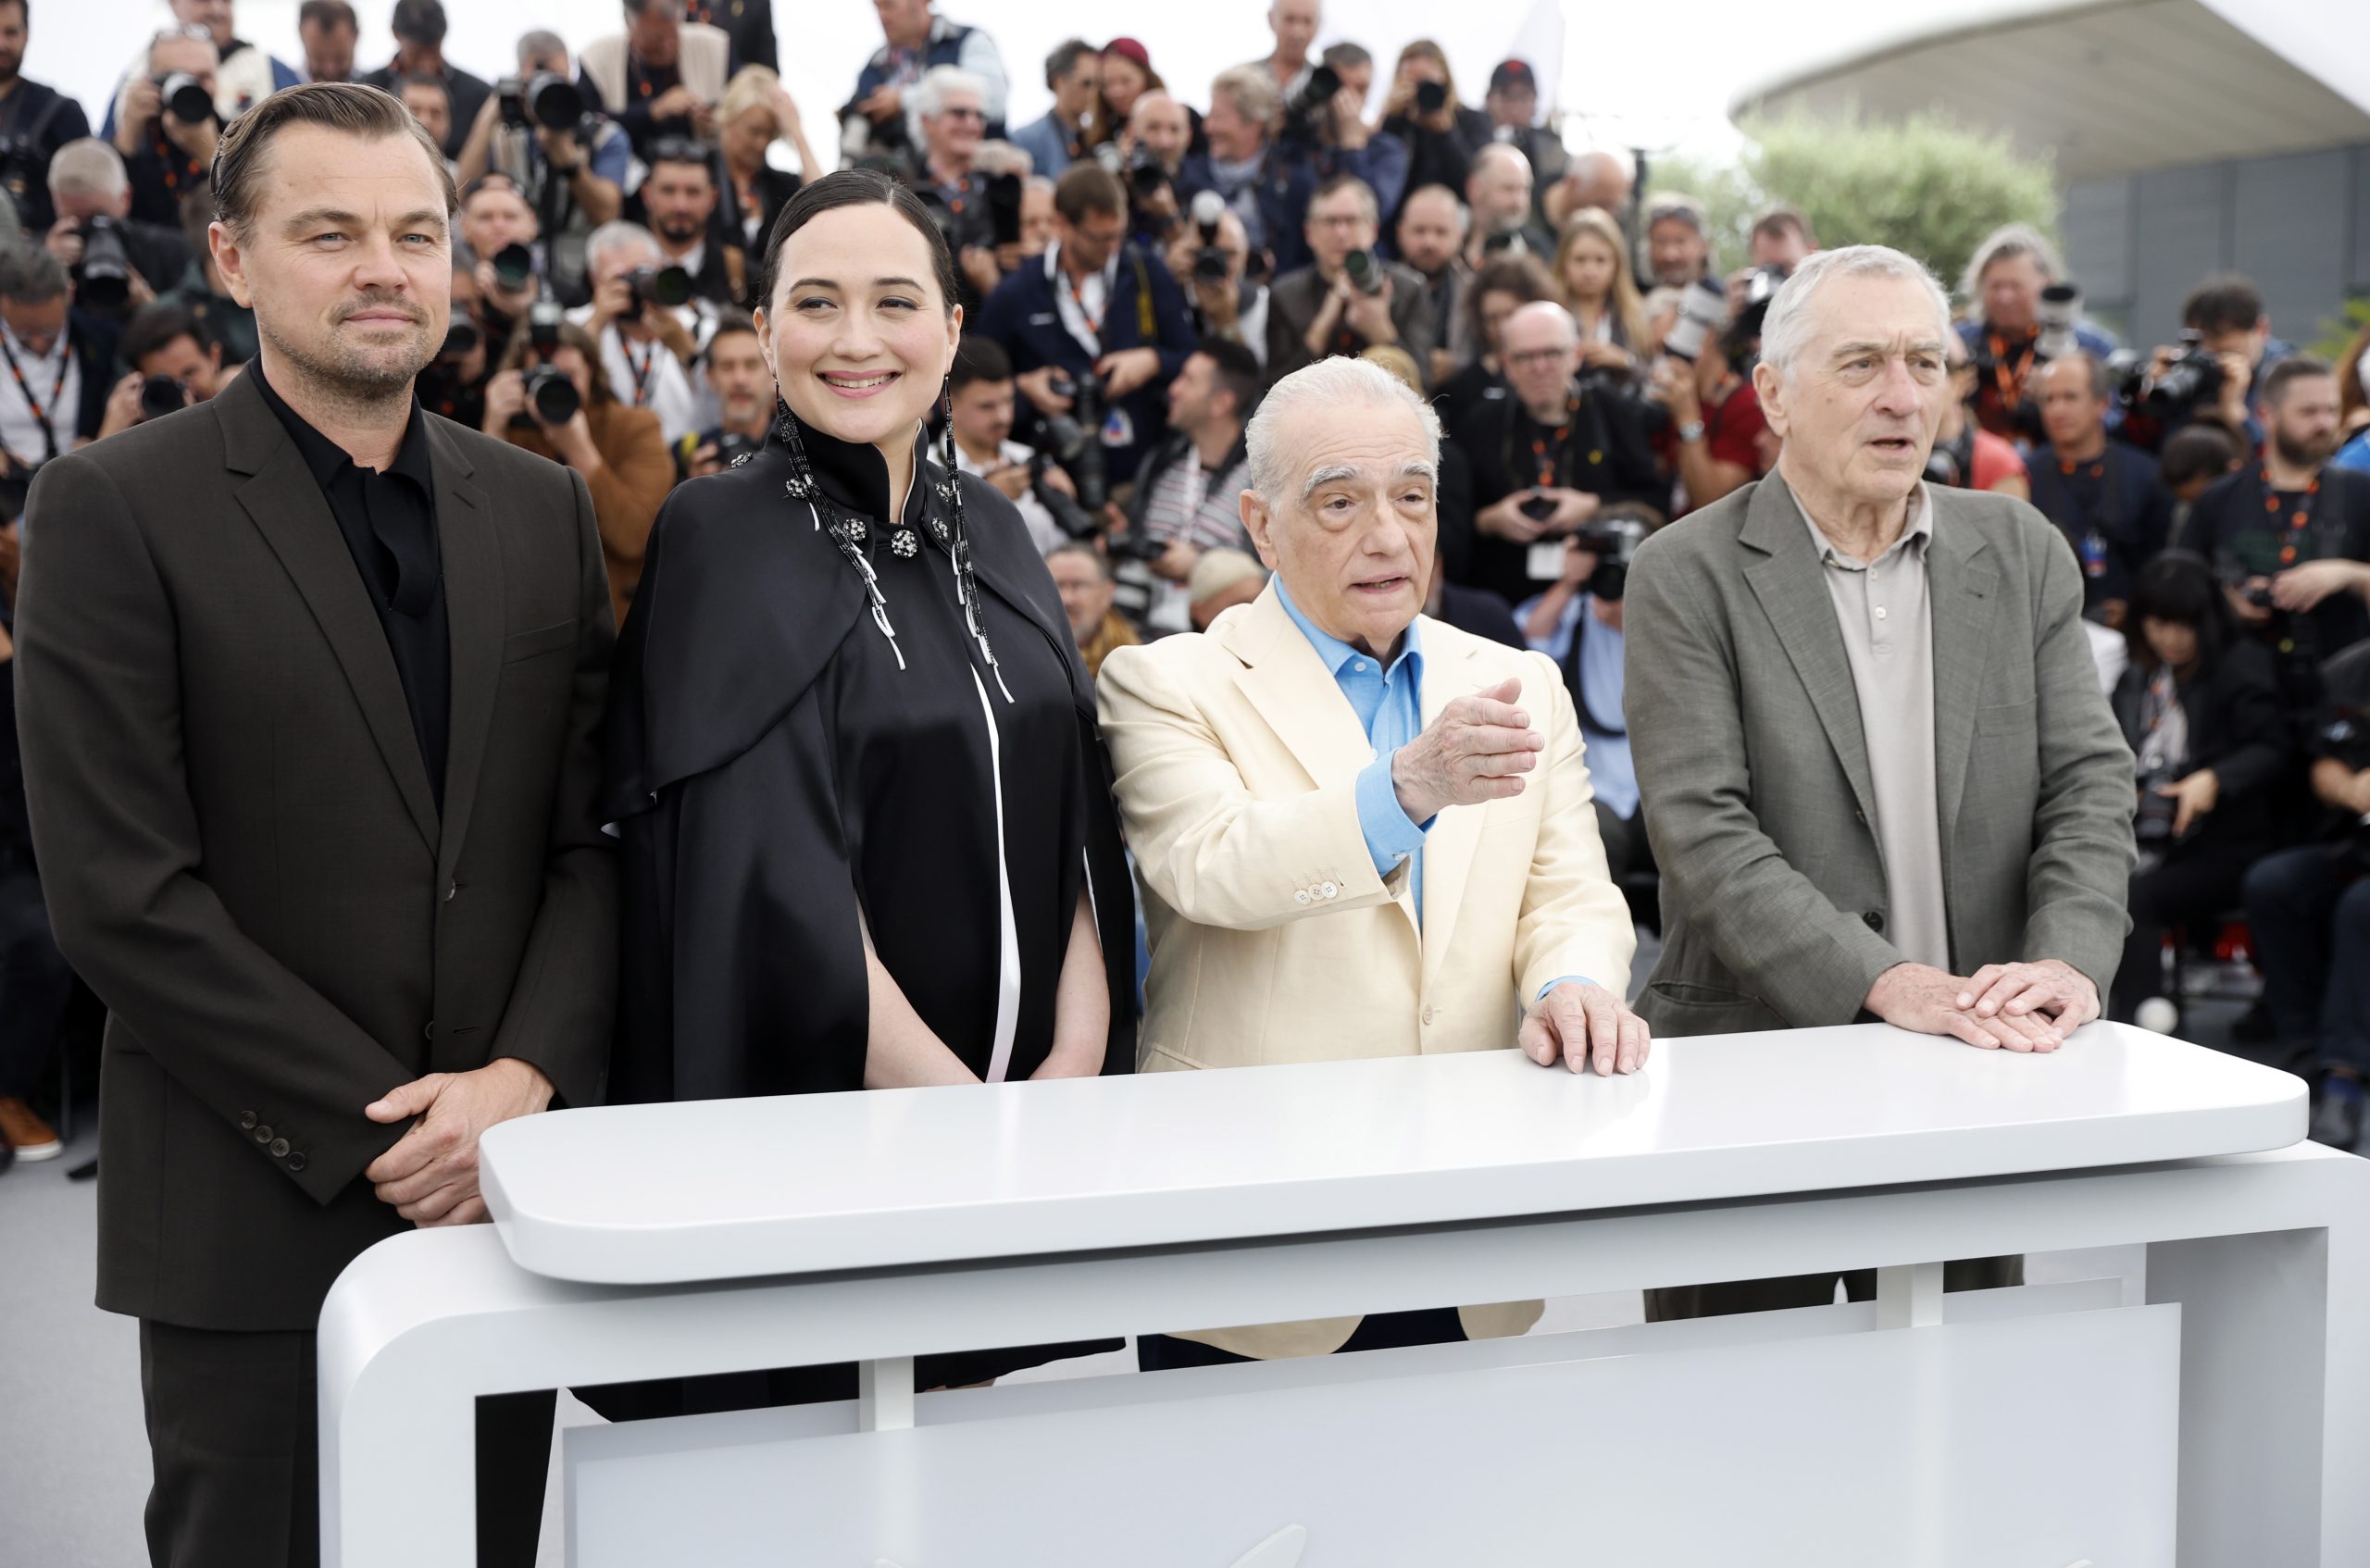 epa10643326 (From-R) Robert De Niro, Martin Scorsese, Lily Gladstone, and Leonardo DiCaprio attend the photocall for 'Killers of the Flower Moon' during the 76th annual Cannes Film Festival, in Cannes, France, 21 May 2023. The festival runs from 16 to 27 May.  EPA/Sebastien Nogier